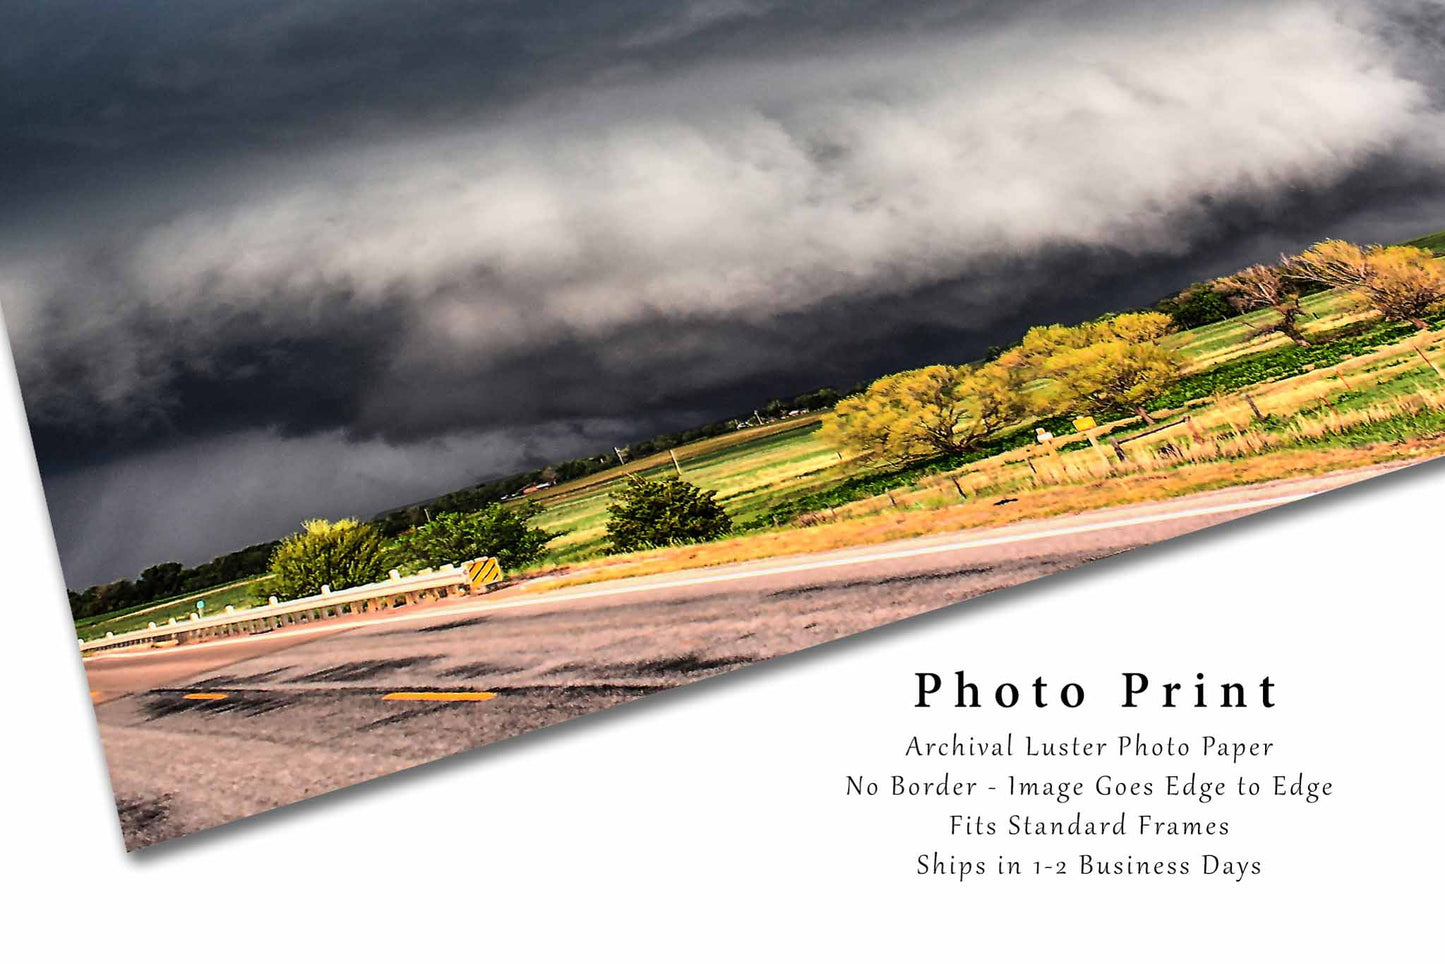 Tornado Photography Art Print - Picture of Wide Tornado Touching Down in Northwest Oklahoma Extreme Weather Photo Storm Photograph